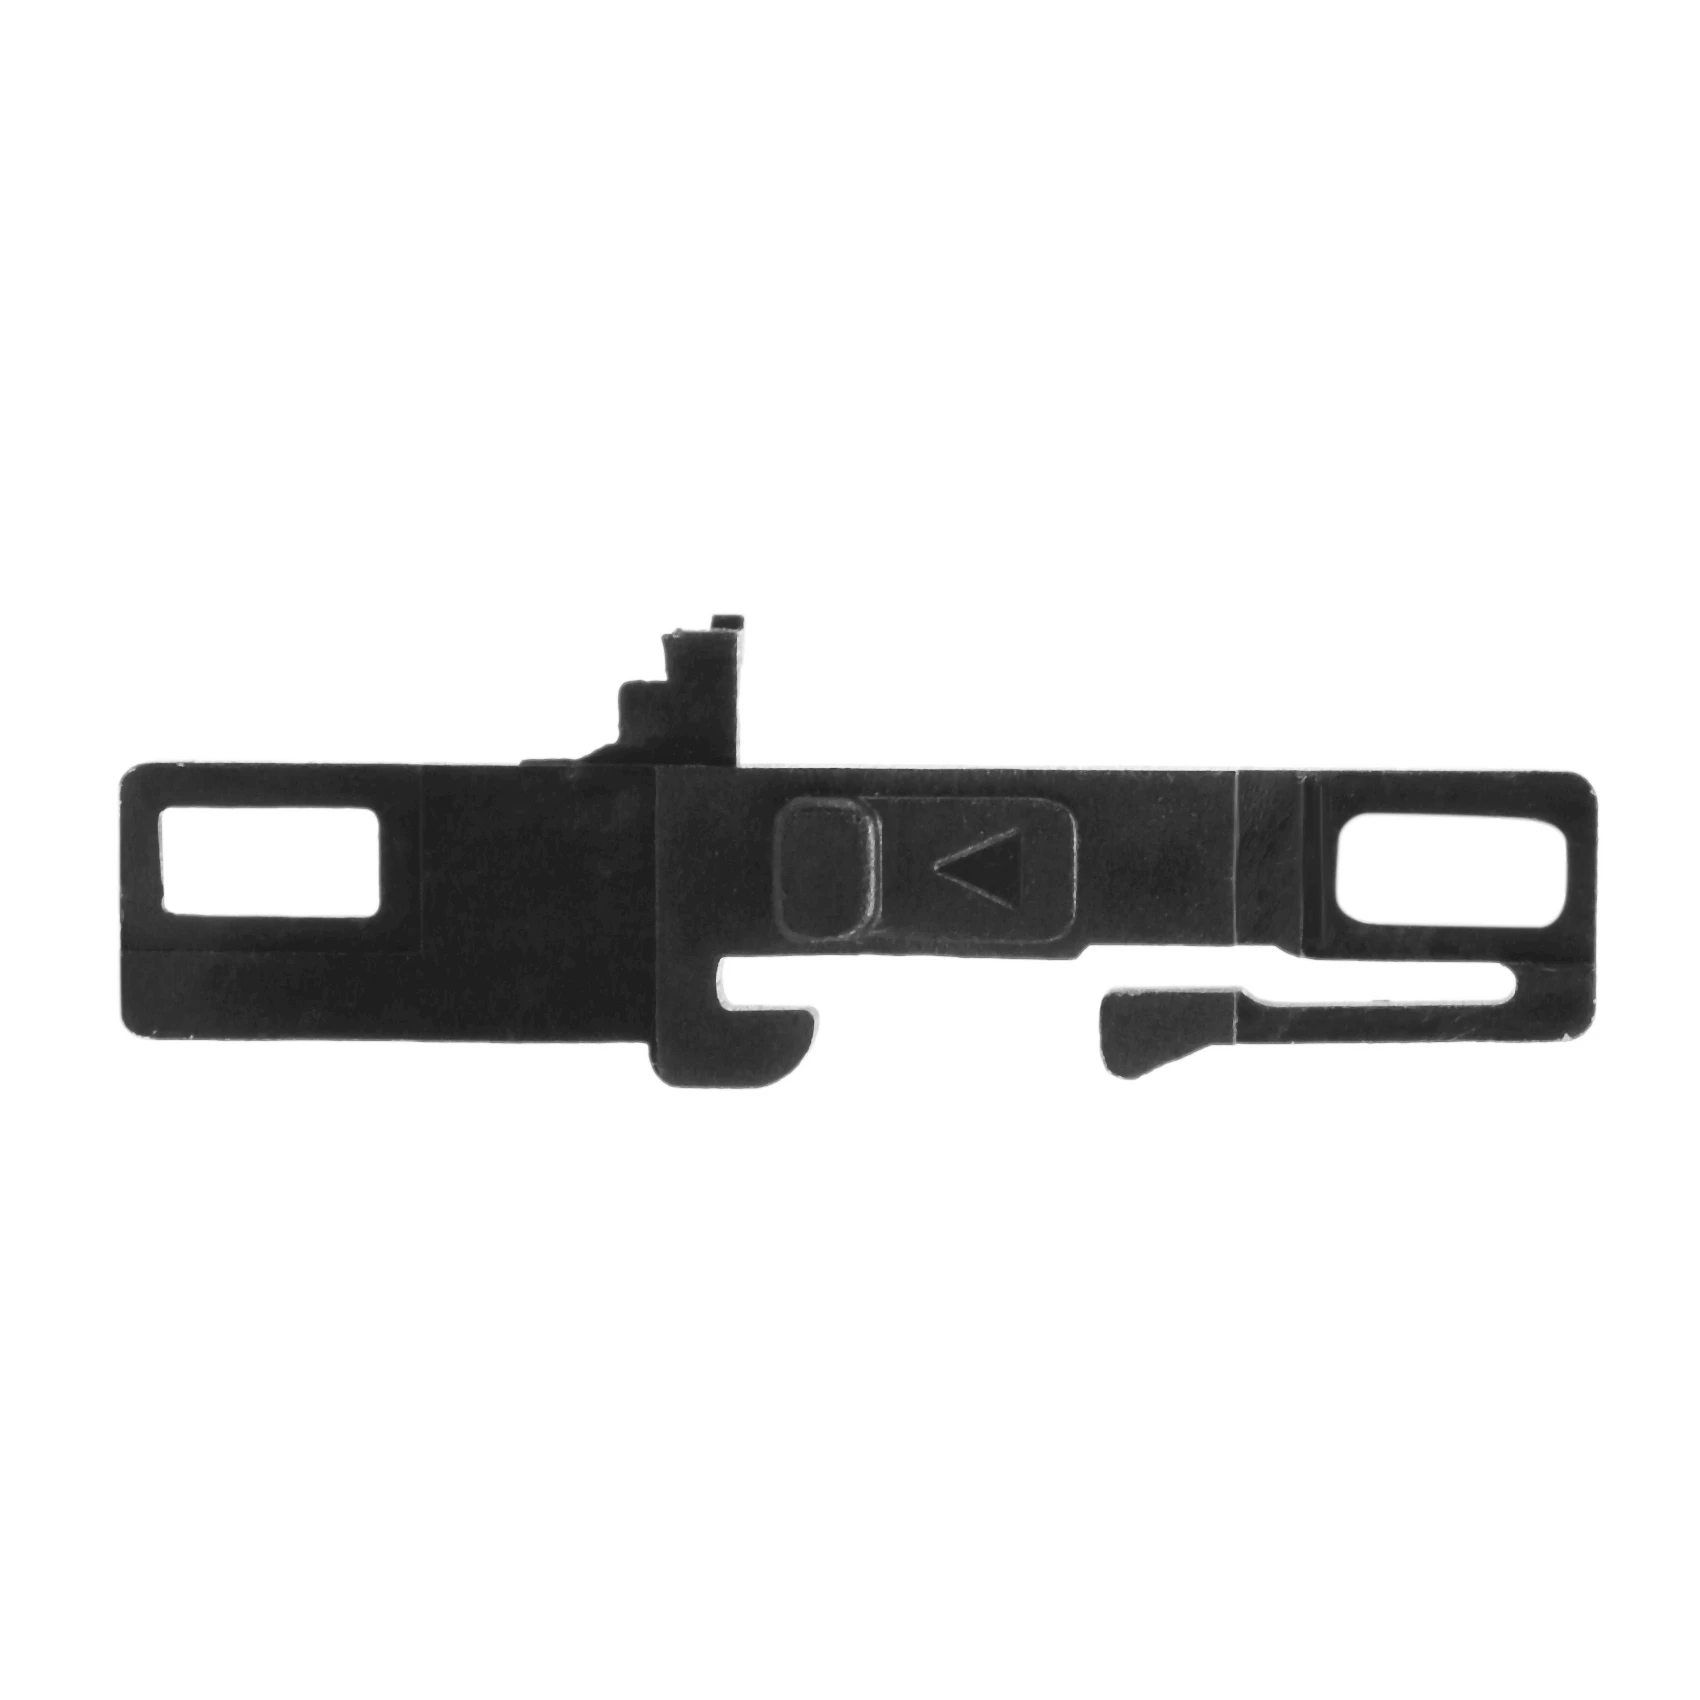 

Suitable for Canon Suitable for Canon Eos 30 50 33 7 7S 30V Back Hook/Back Lock/Lock Hook/Door Buckle